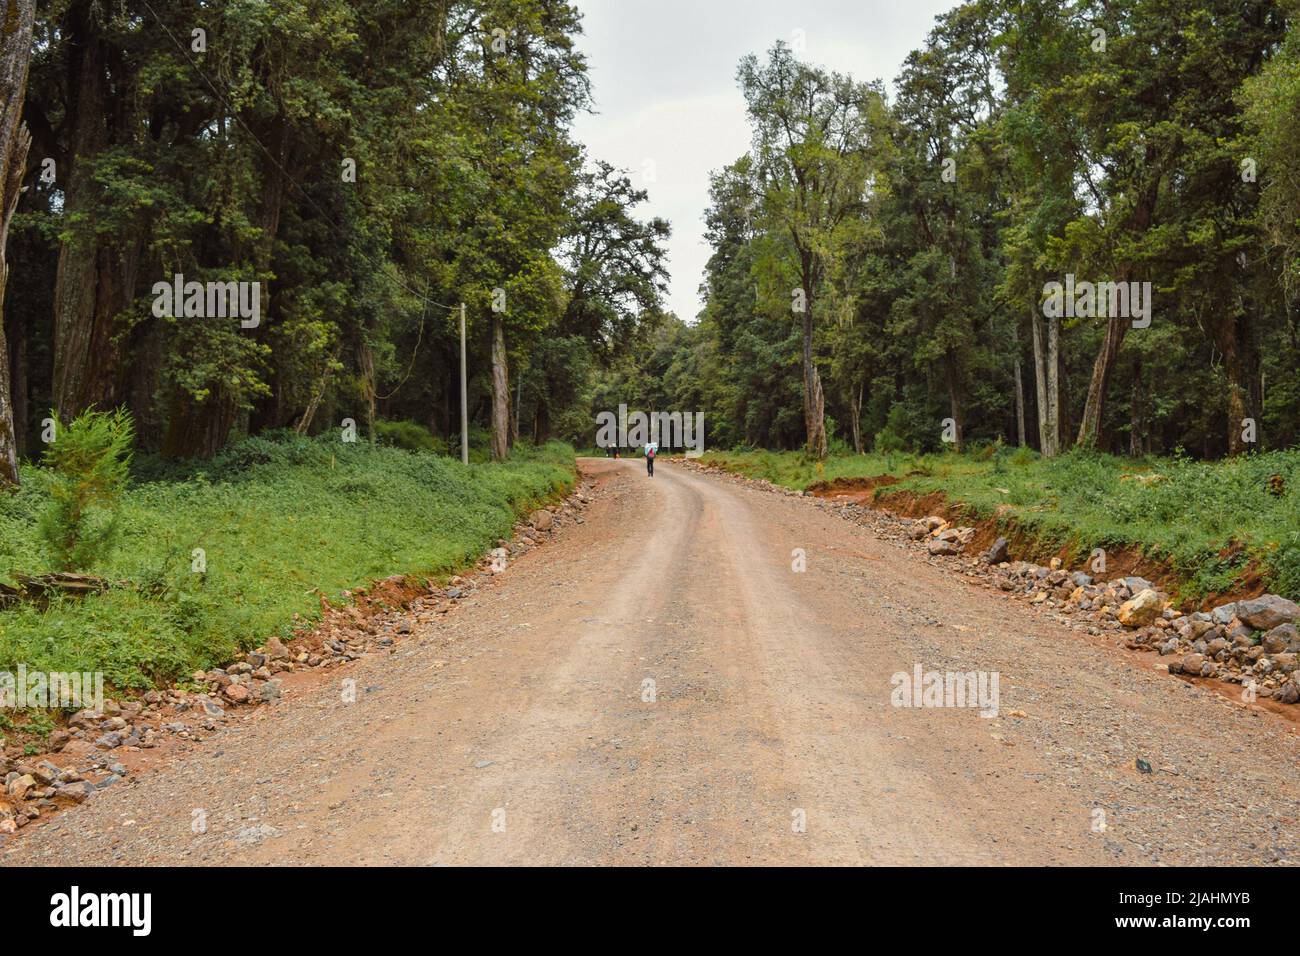 A hiker on a dirt road in the forest at Mount Kenya National Park, Kenya Stock Photo